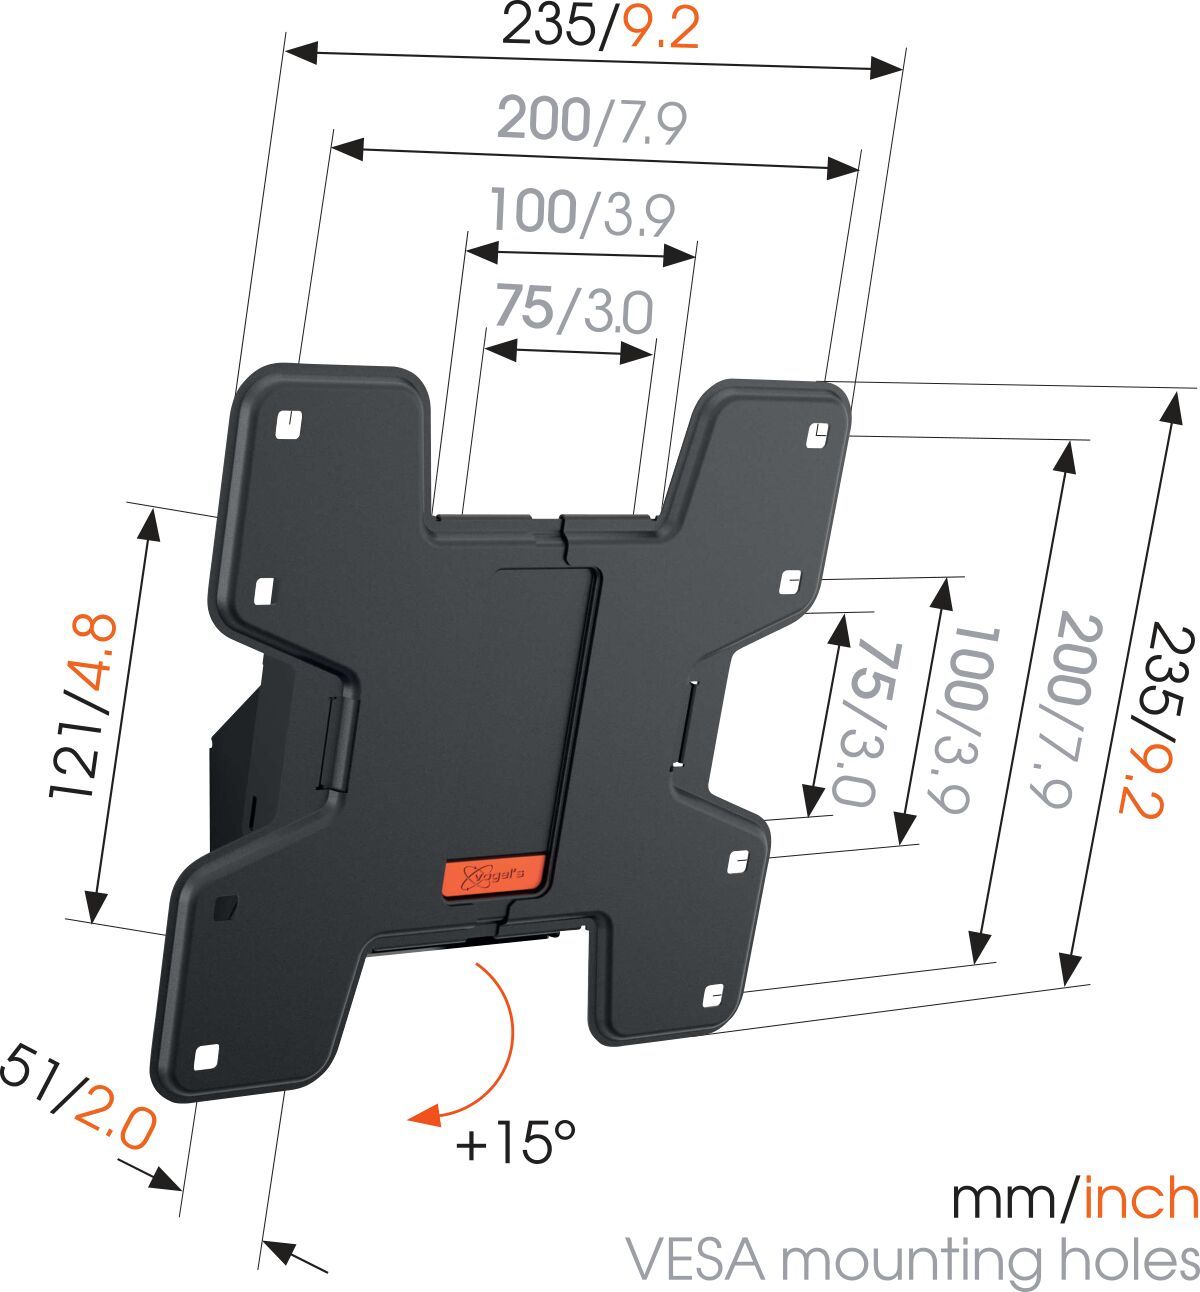 Vogel's WALL 3115 Tilting TV Wall Mount - Suitable for 19 up to 43 inch TVs up to Tilt up to 15° - Dimensions